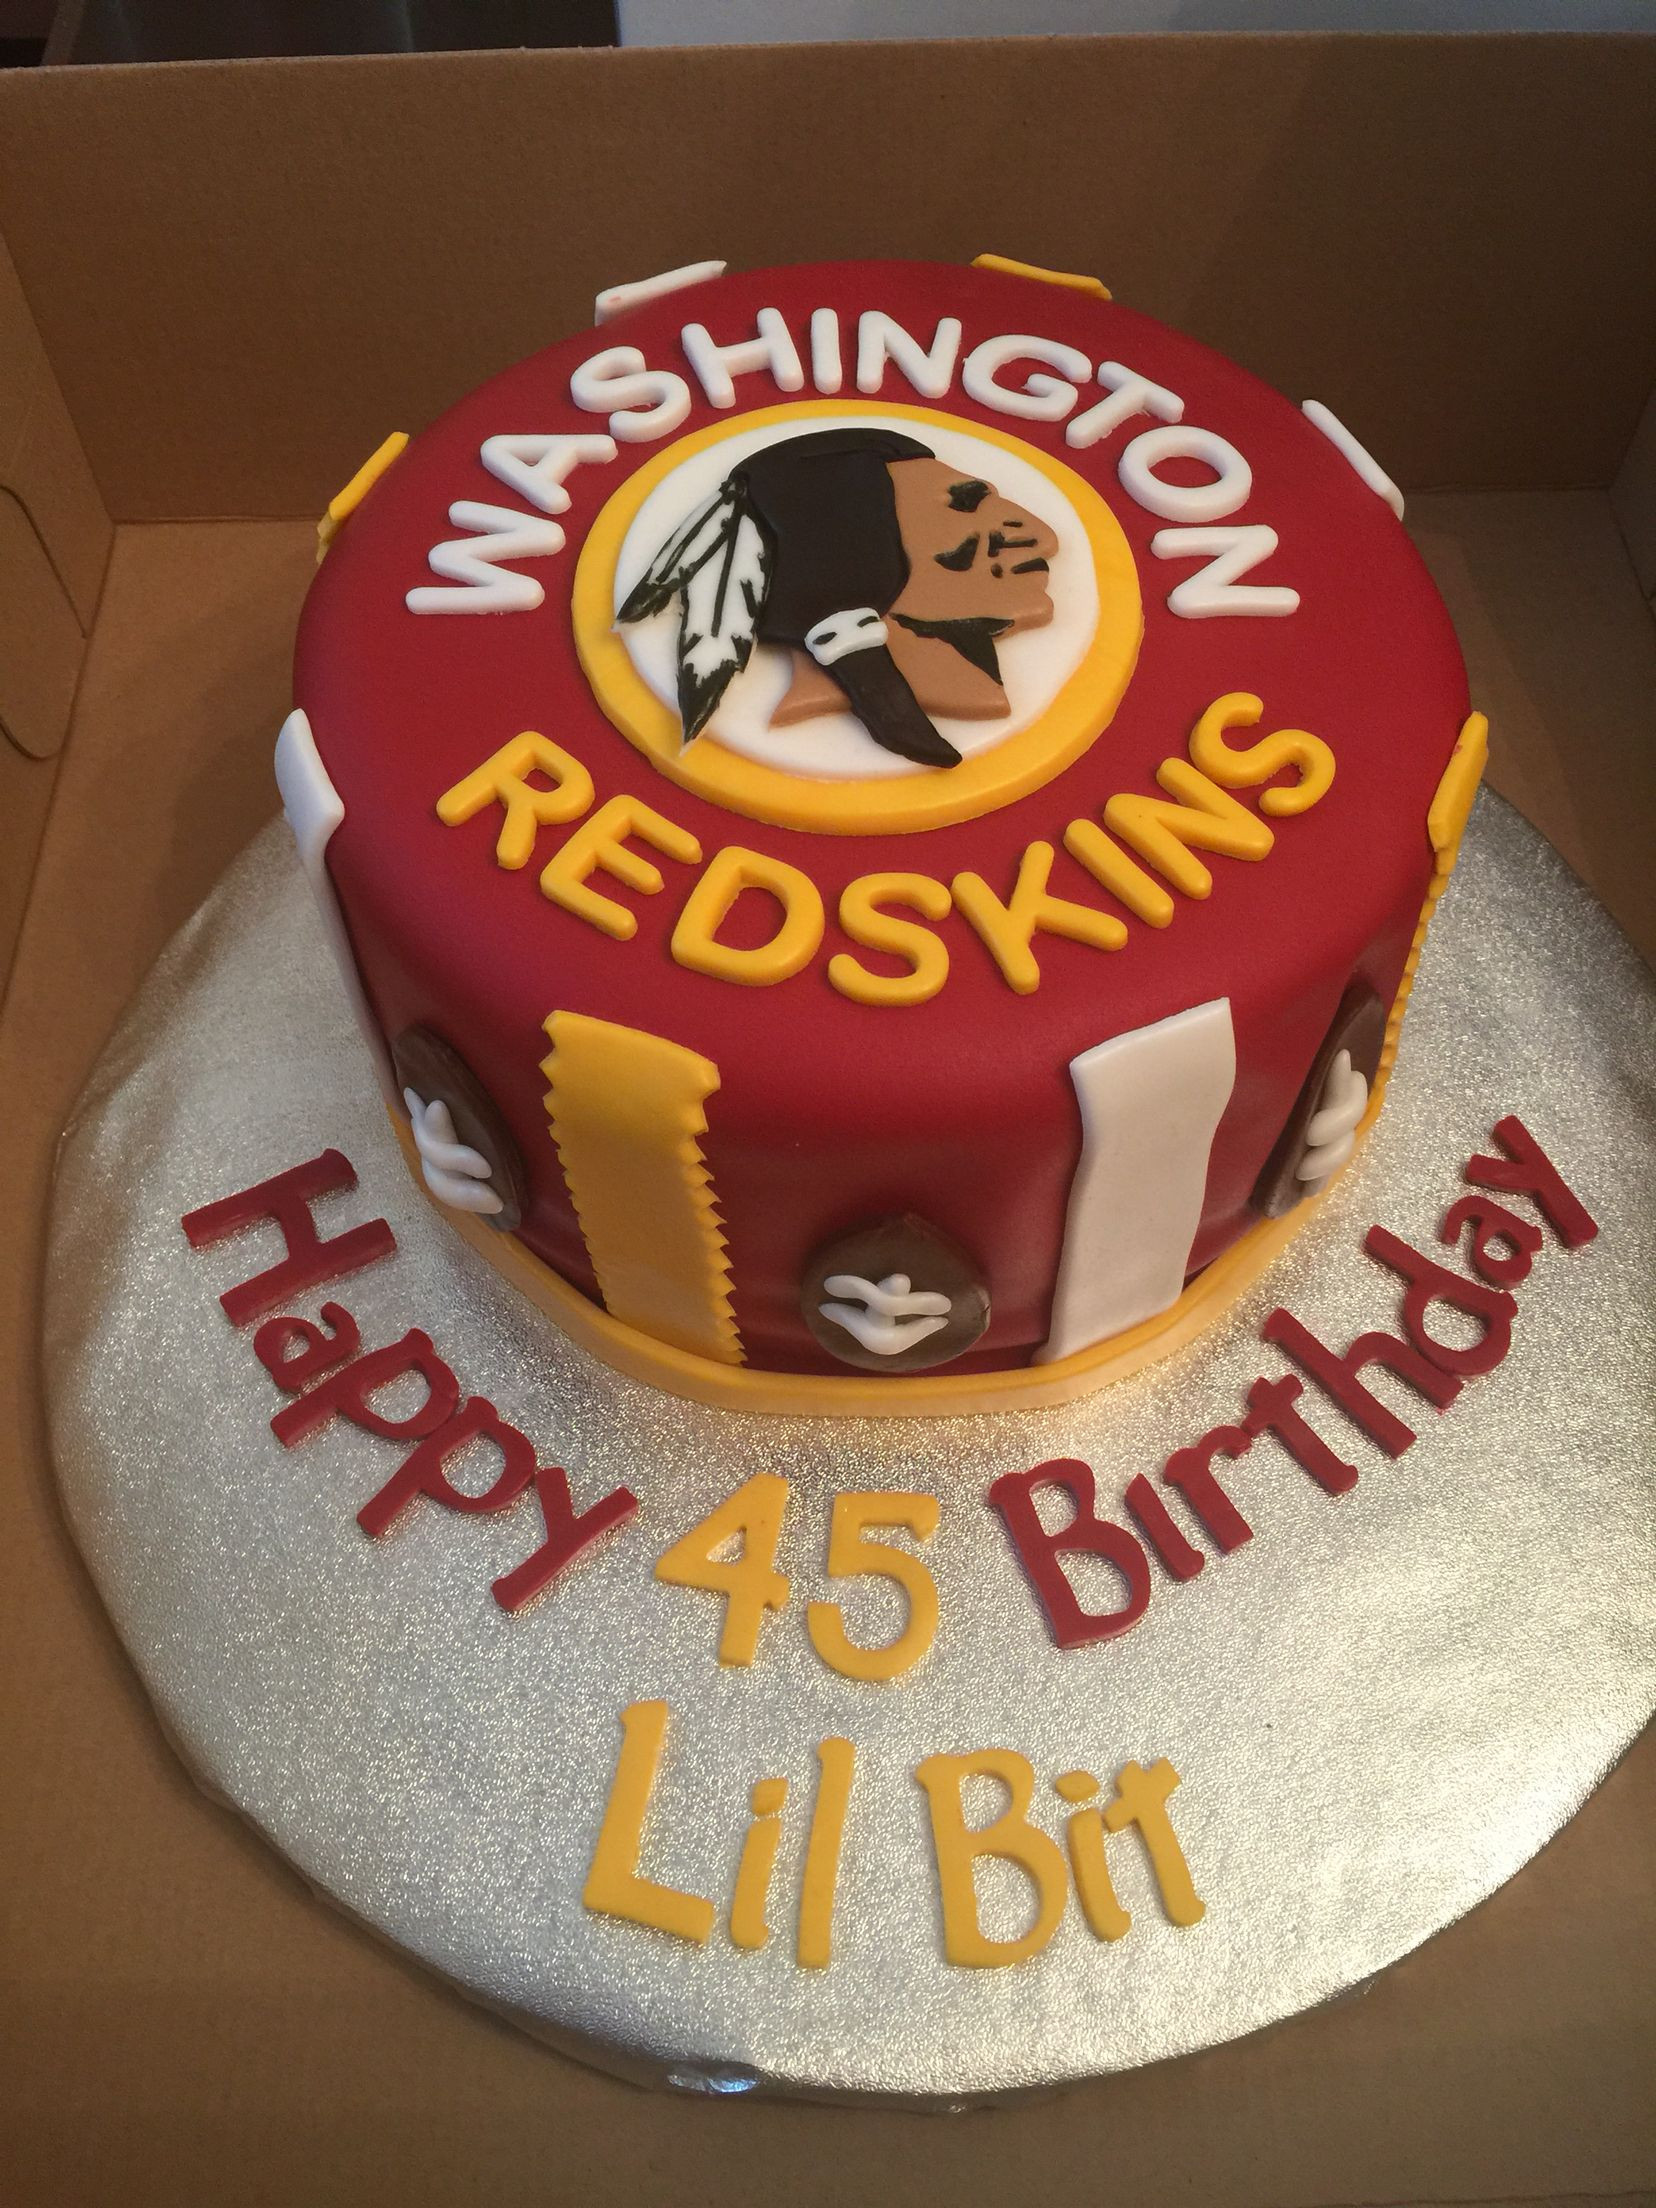 Redskins Birthday Cake
 The detail on this cake is great What an awesome birthday